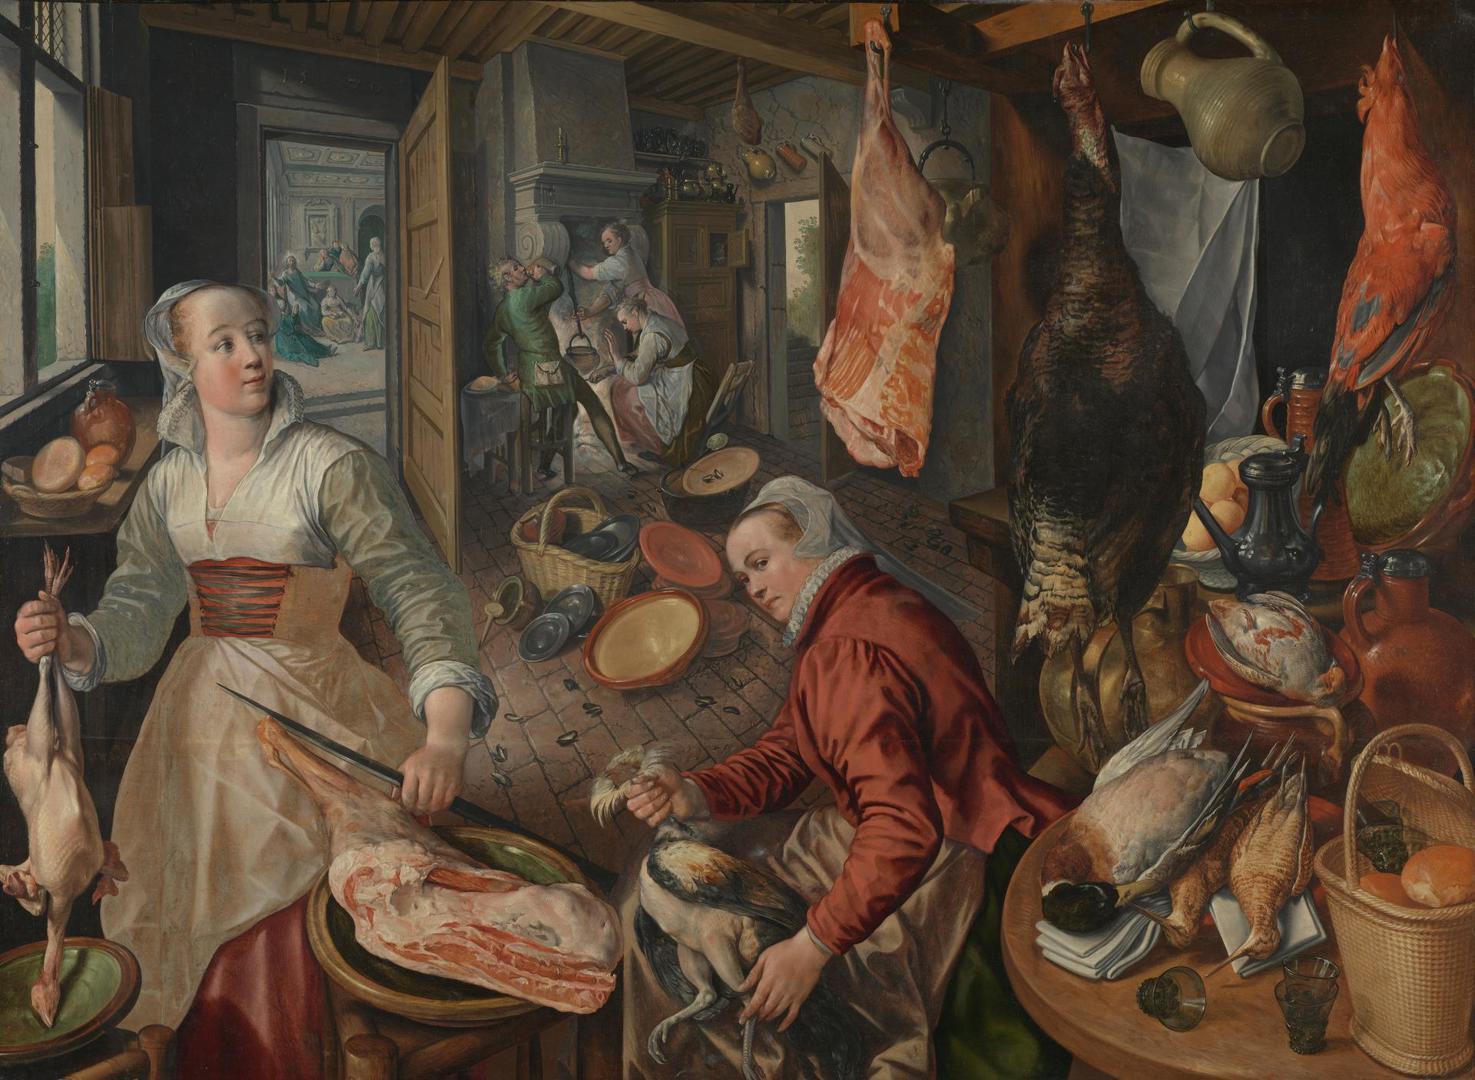 The Four Elements: Fire by Joachim Beuckelaer